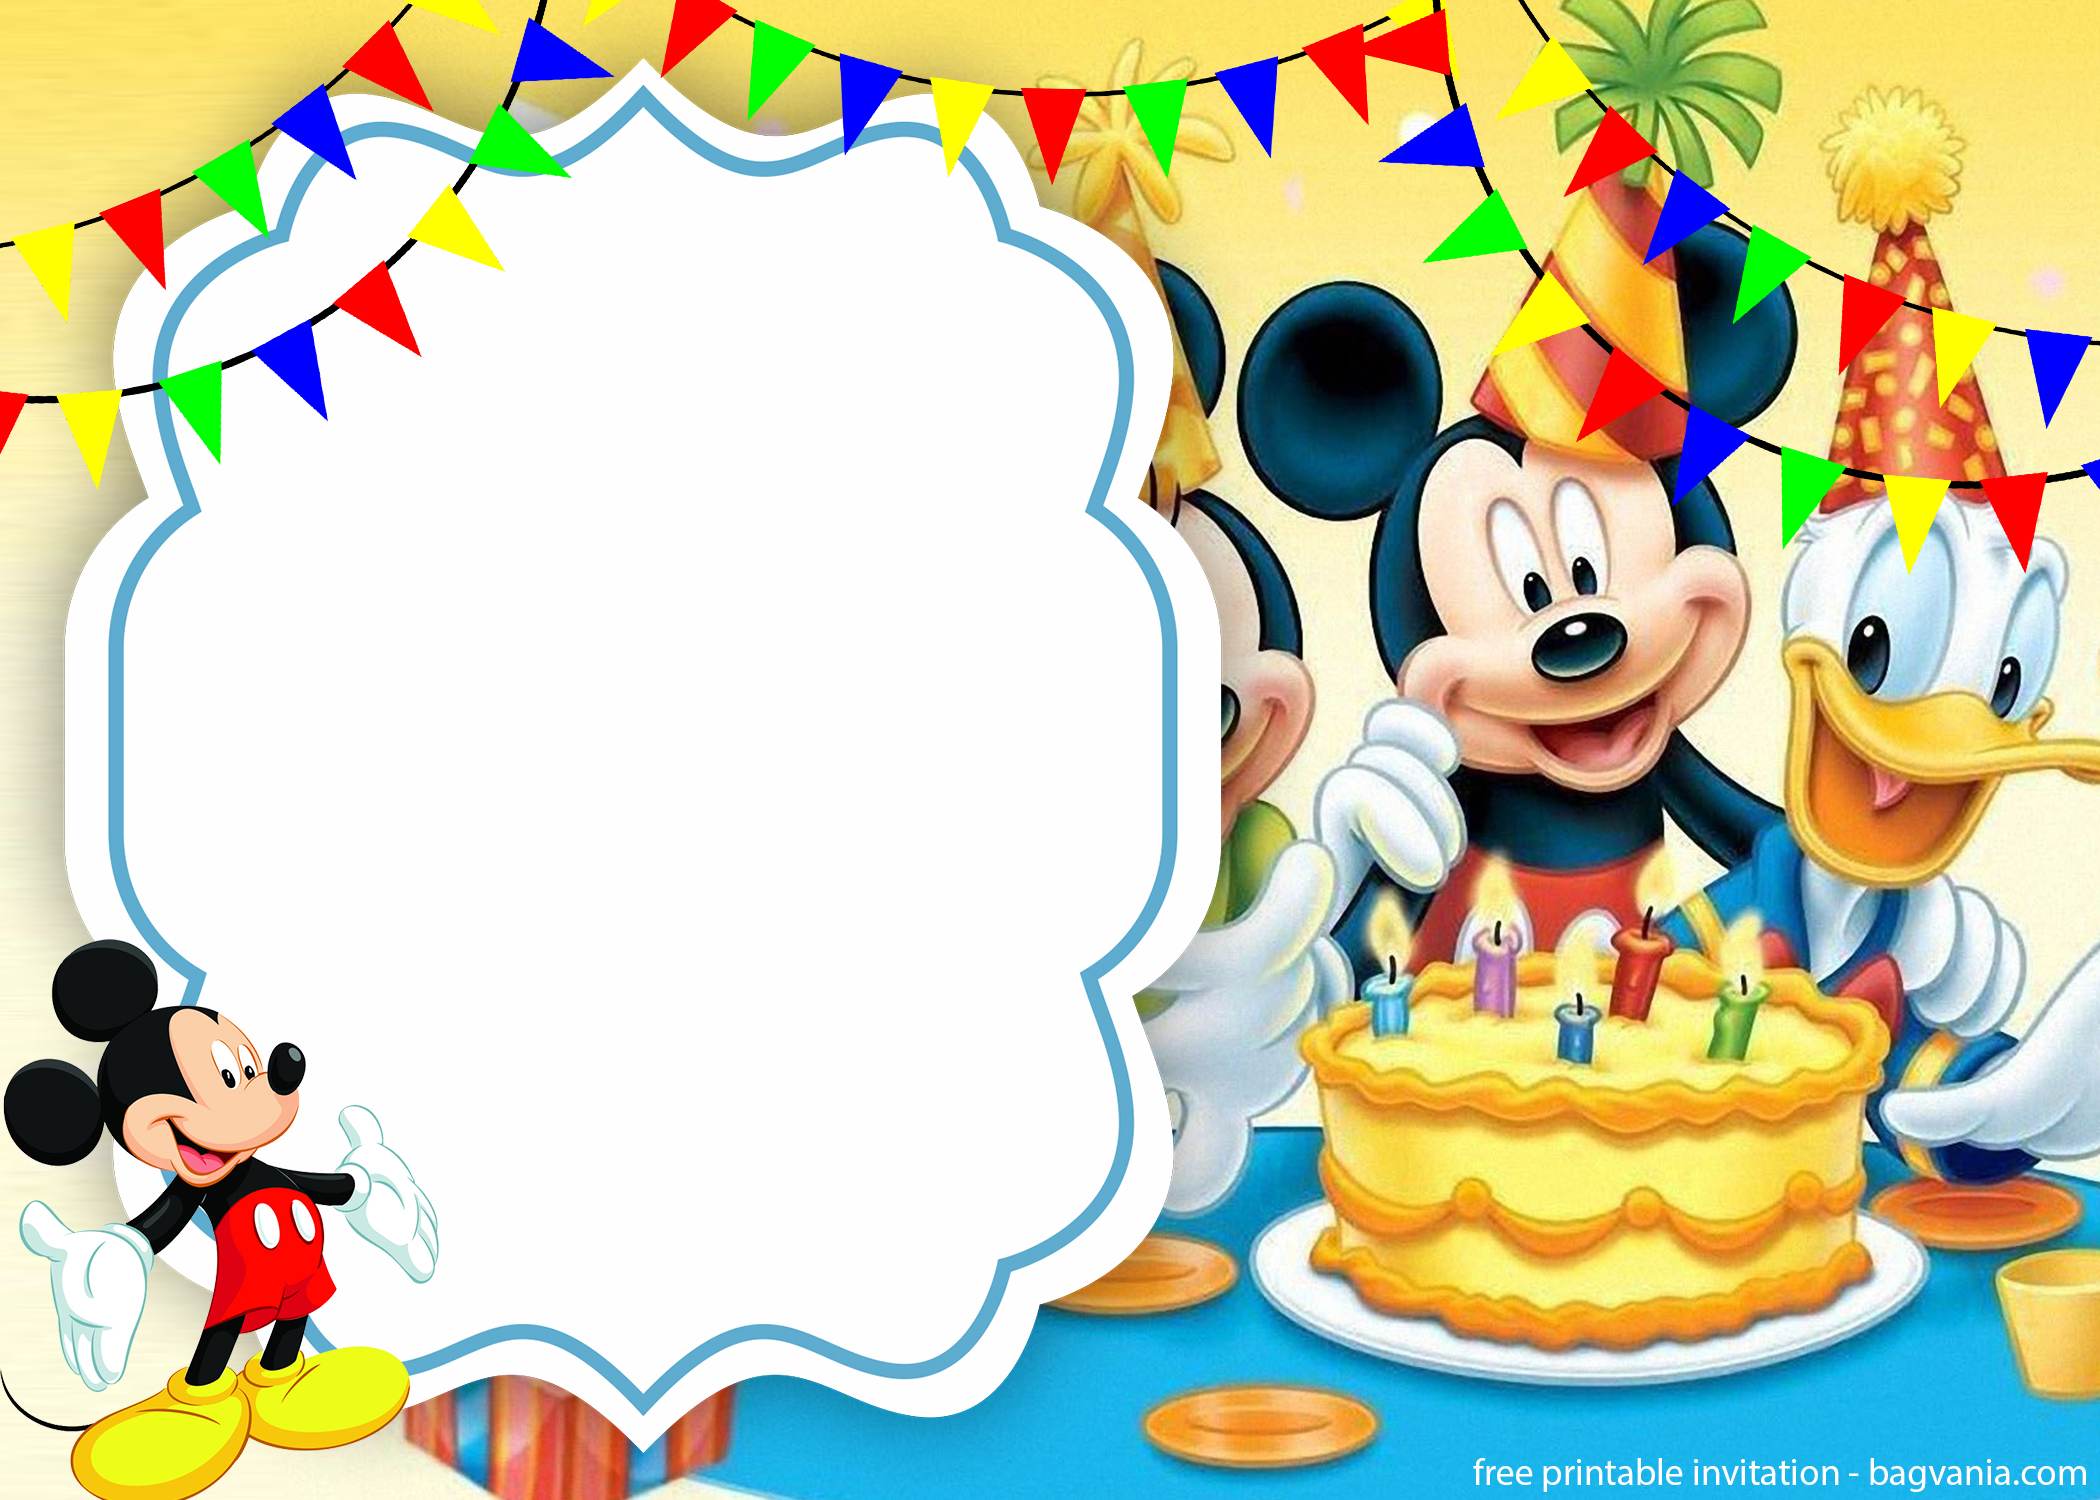 Free Mickey Mouse Invitation Template from www.bagvania.com